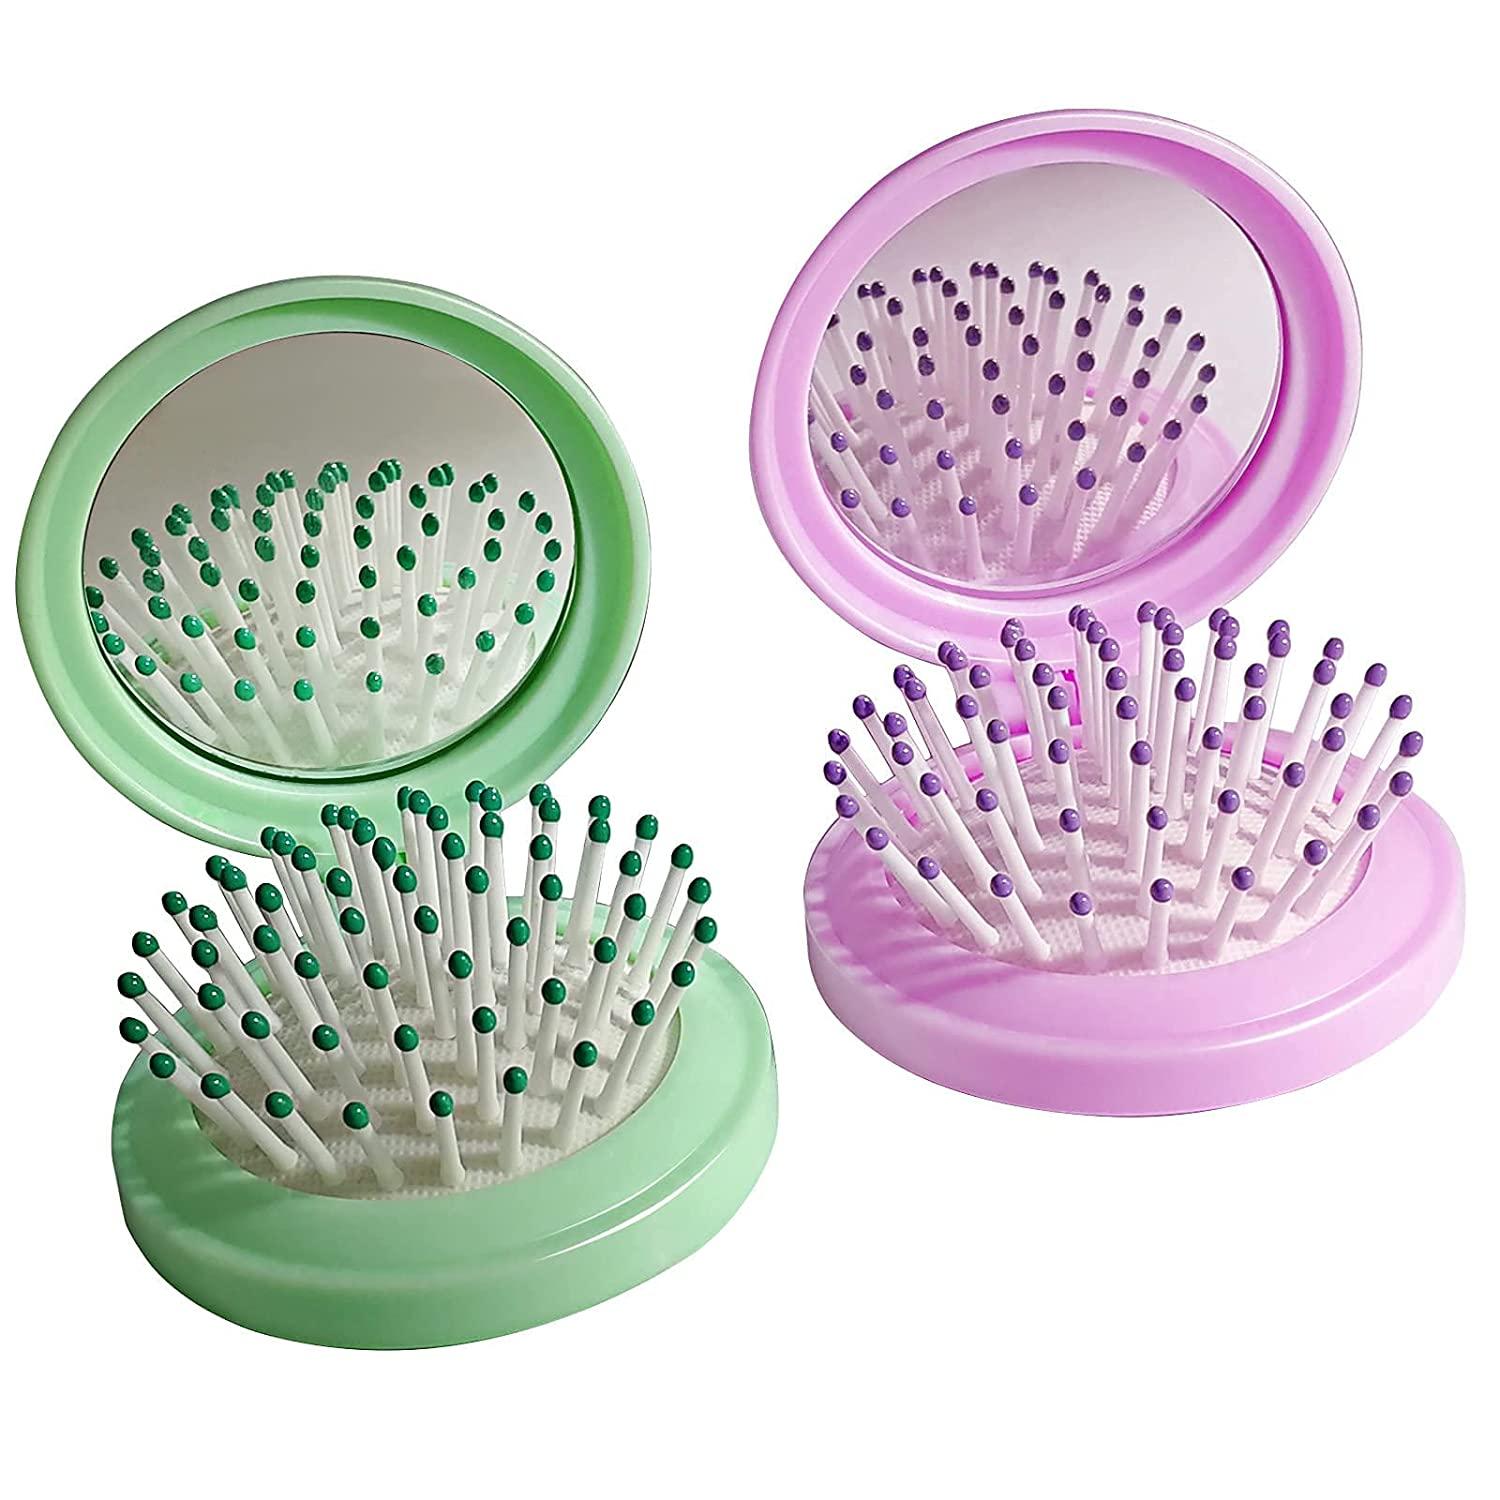 Folding Hair Brush with Mirror,Round Mini Compact Massage Comb for Purse/ Pocket,Travel Size for Girls and Women (Purple+Green)